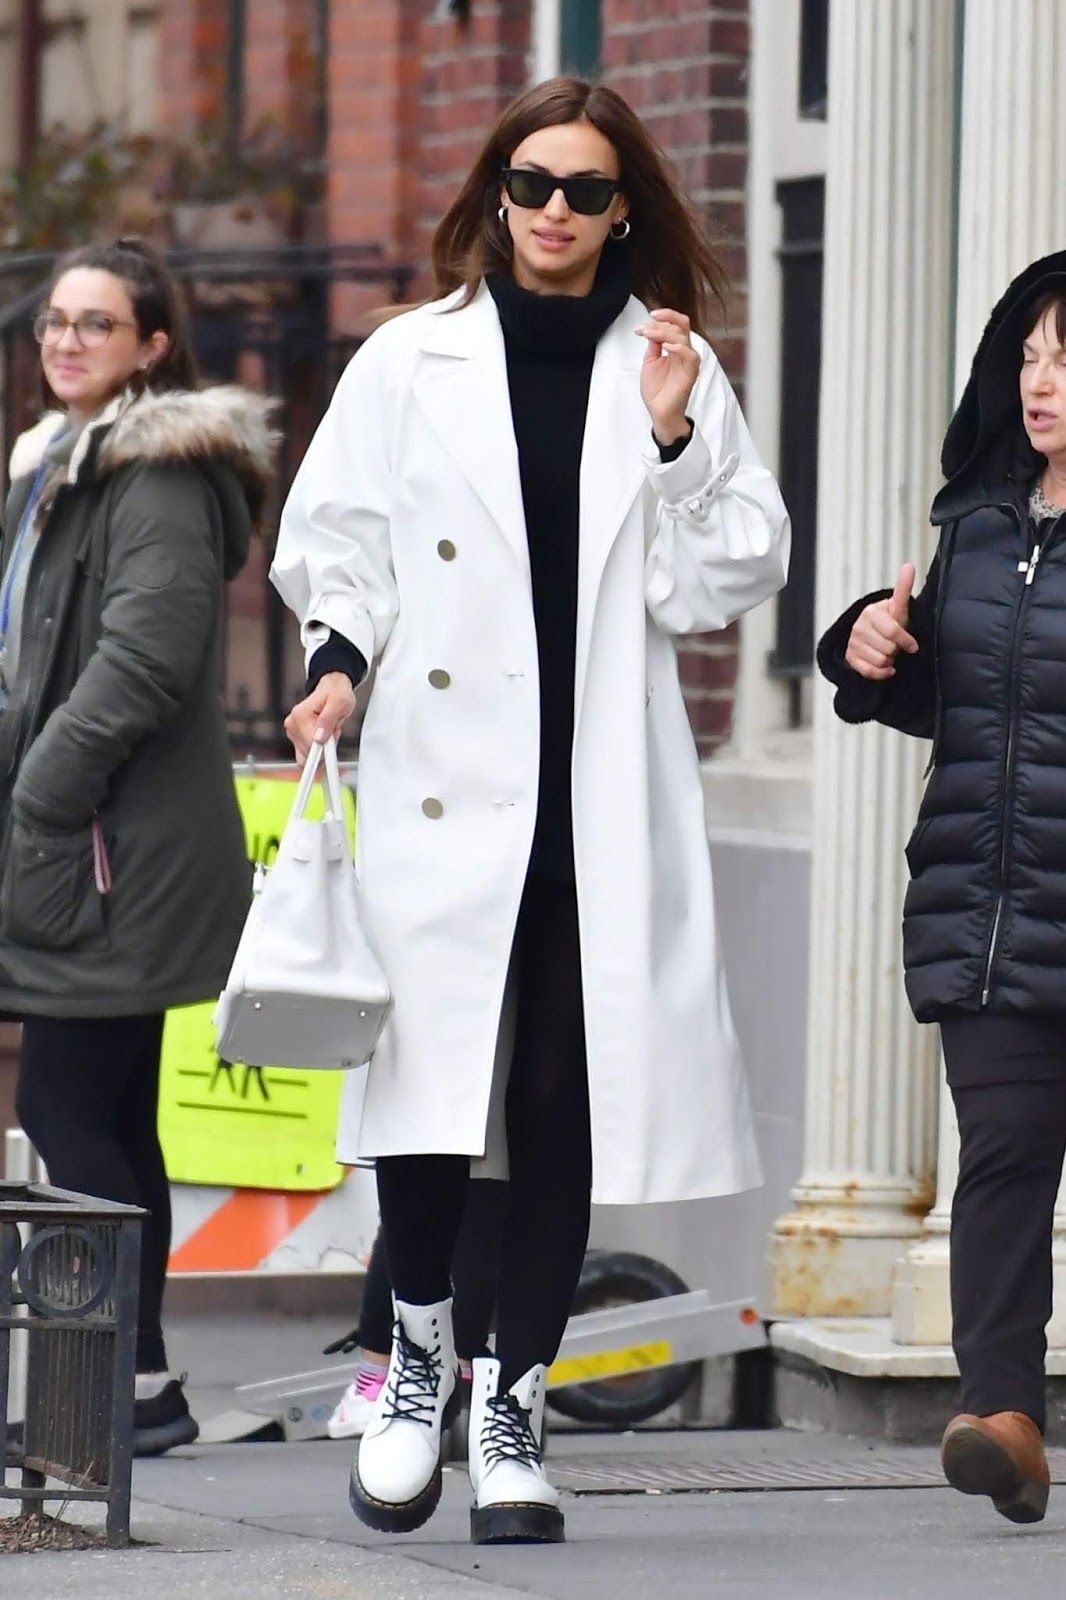 The Piece That Makes Irina Shayk's Outfit so Great